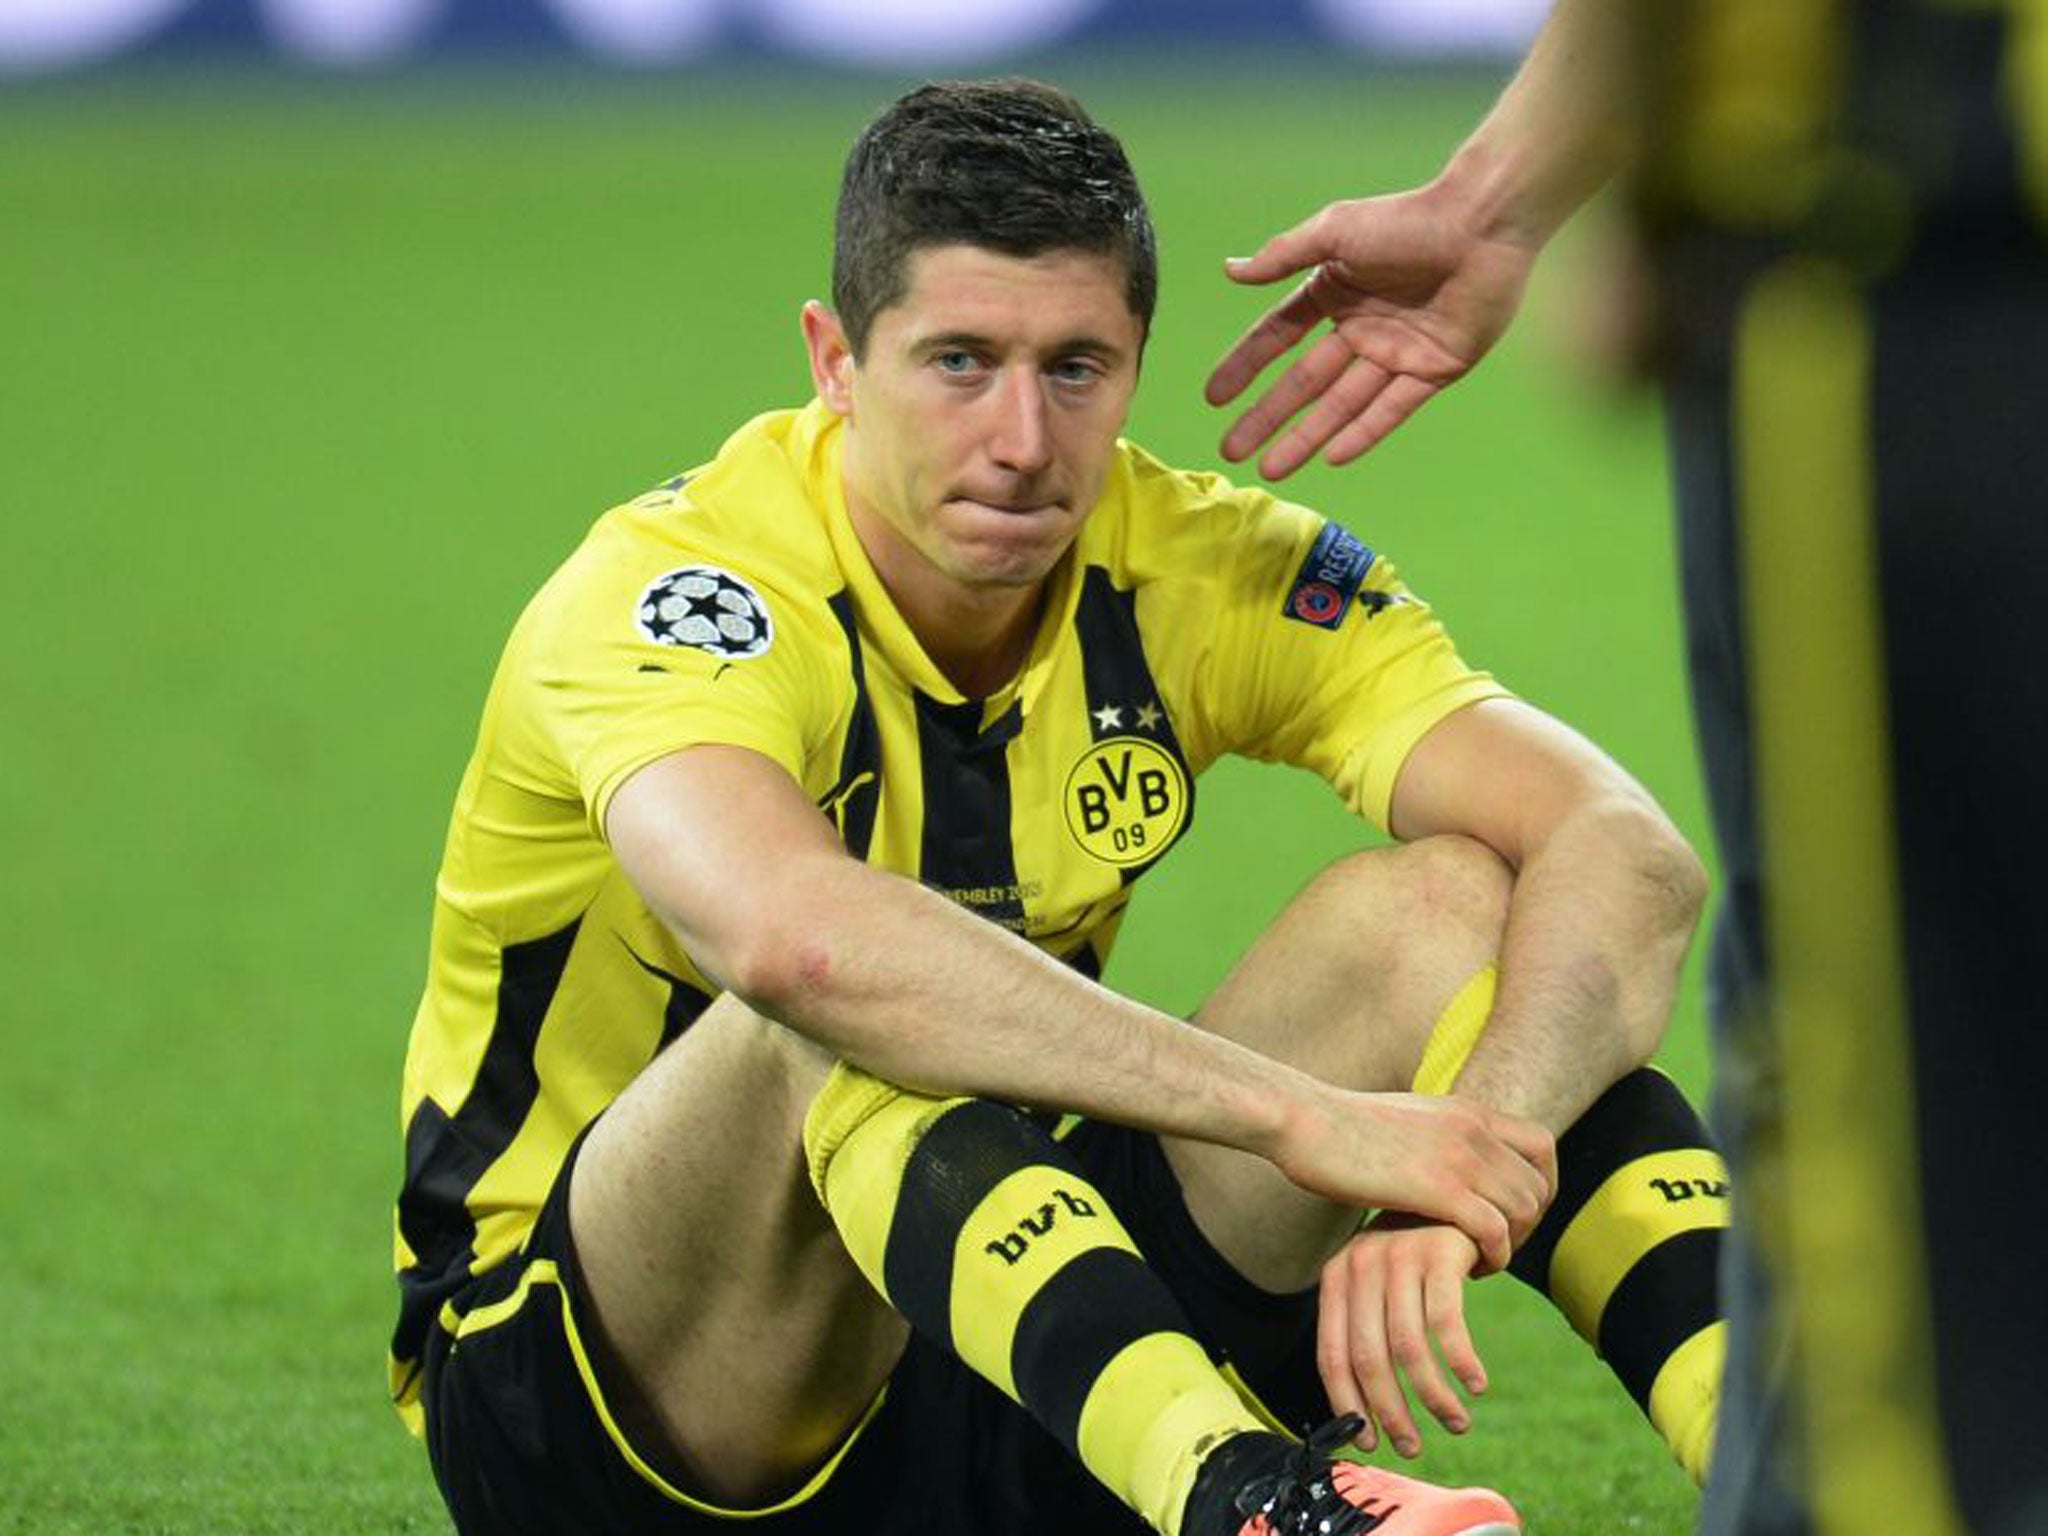 Robert Lewandowski feels the pain of Borussia Dortmund’s defeat by Bayern Munich in the Champions League final at Wembley in May